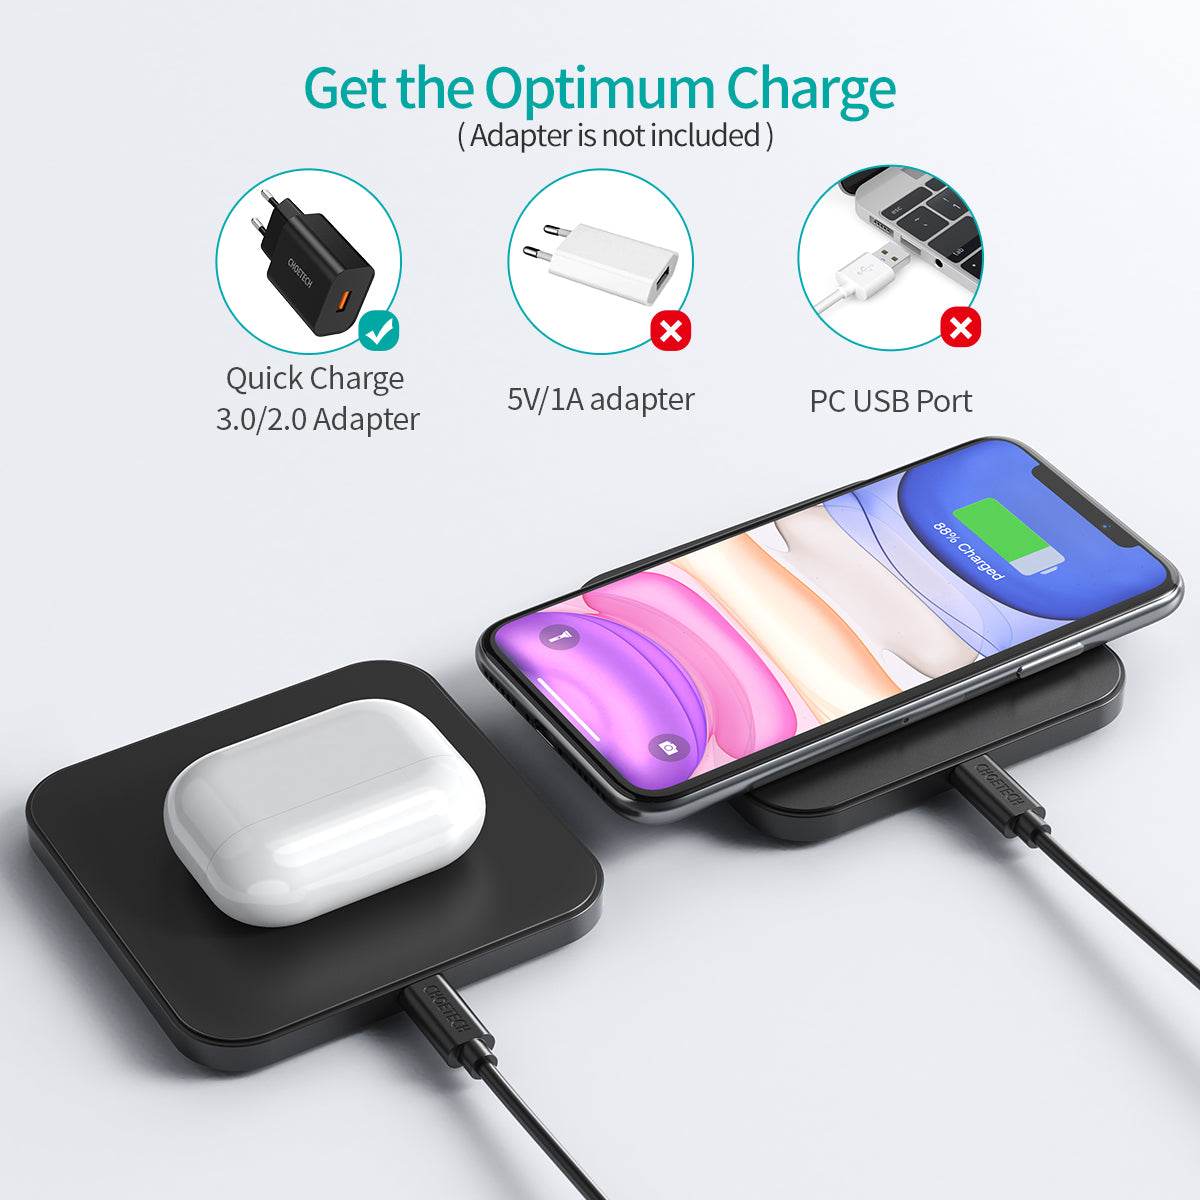 MIX00097 [2 Pack] Wireless Charger, Qi-Certified 10W Max Fast Wireless Charging Pad Compatible with iPhone 12/12 Mini/12 Pro Max/SE 2020/11 Pro Max,Samsung Galaxy S21/S20,AirPods Pro(No AC Adapter)